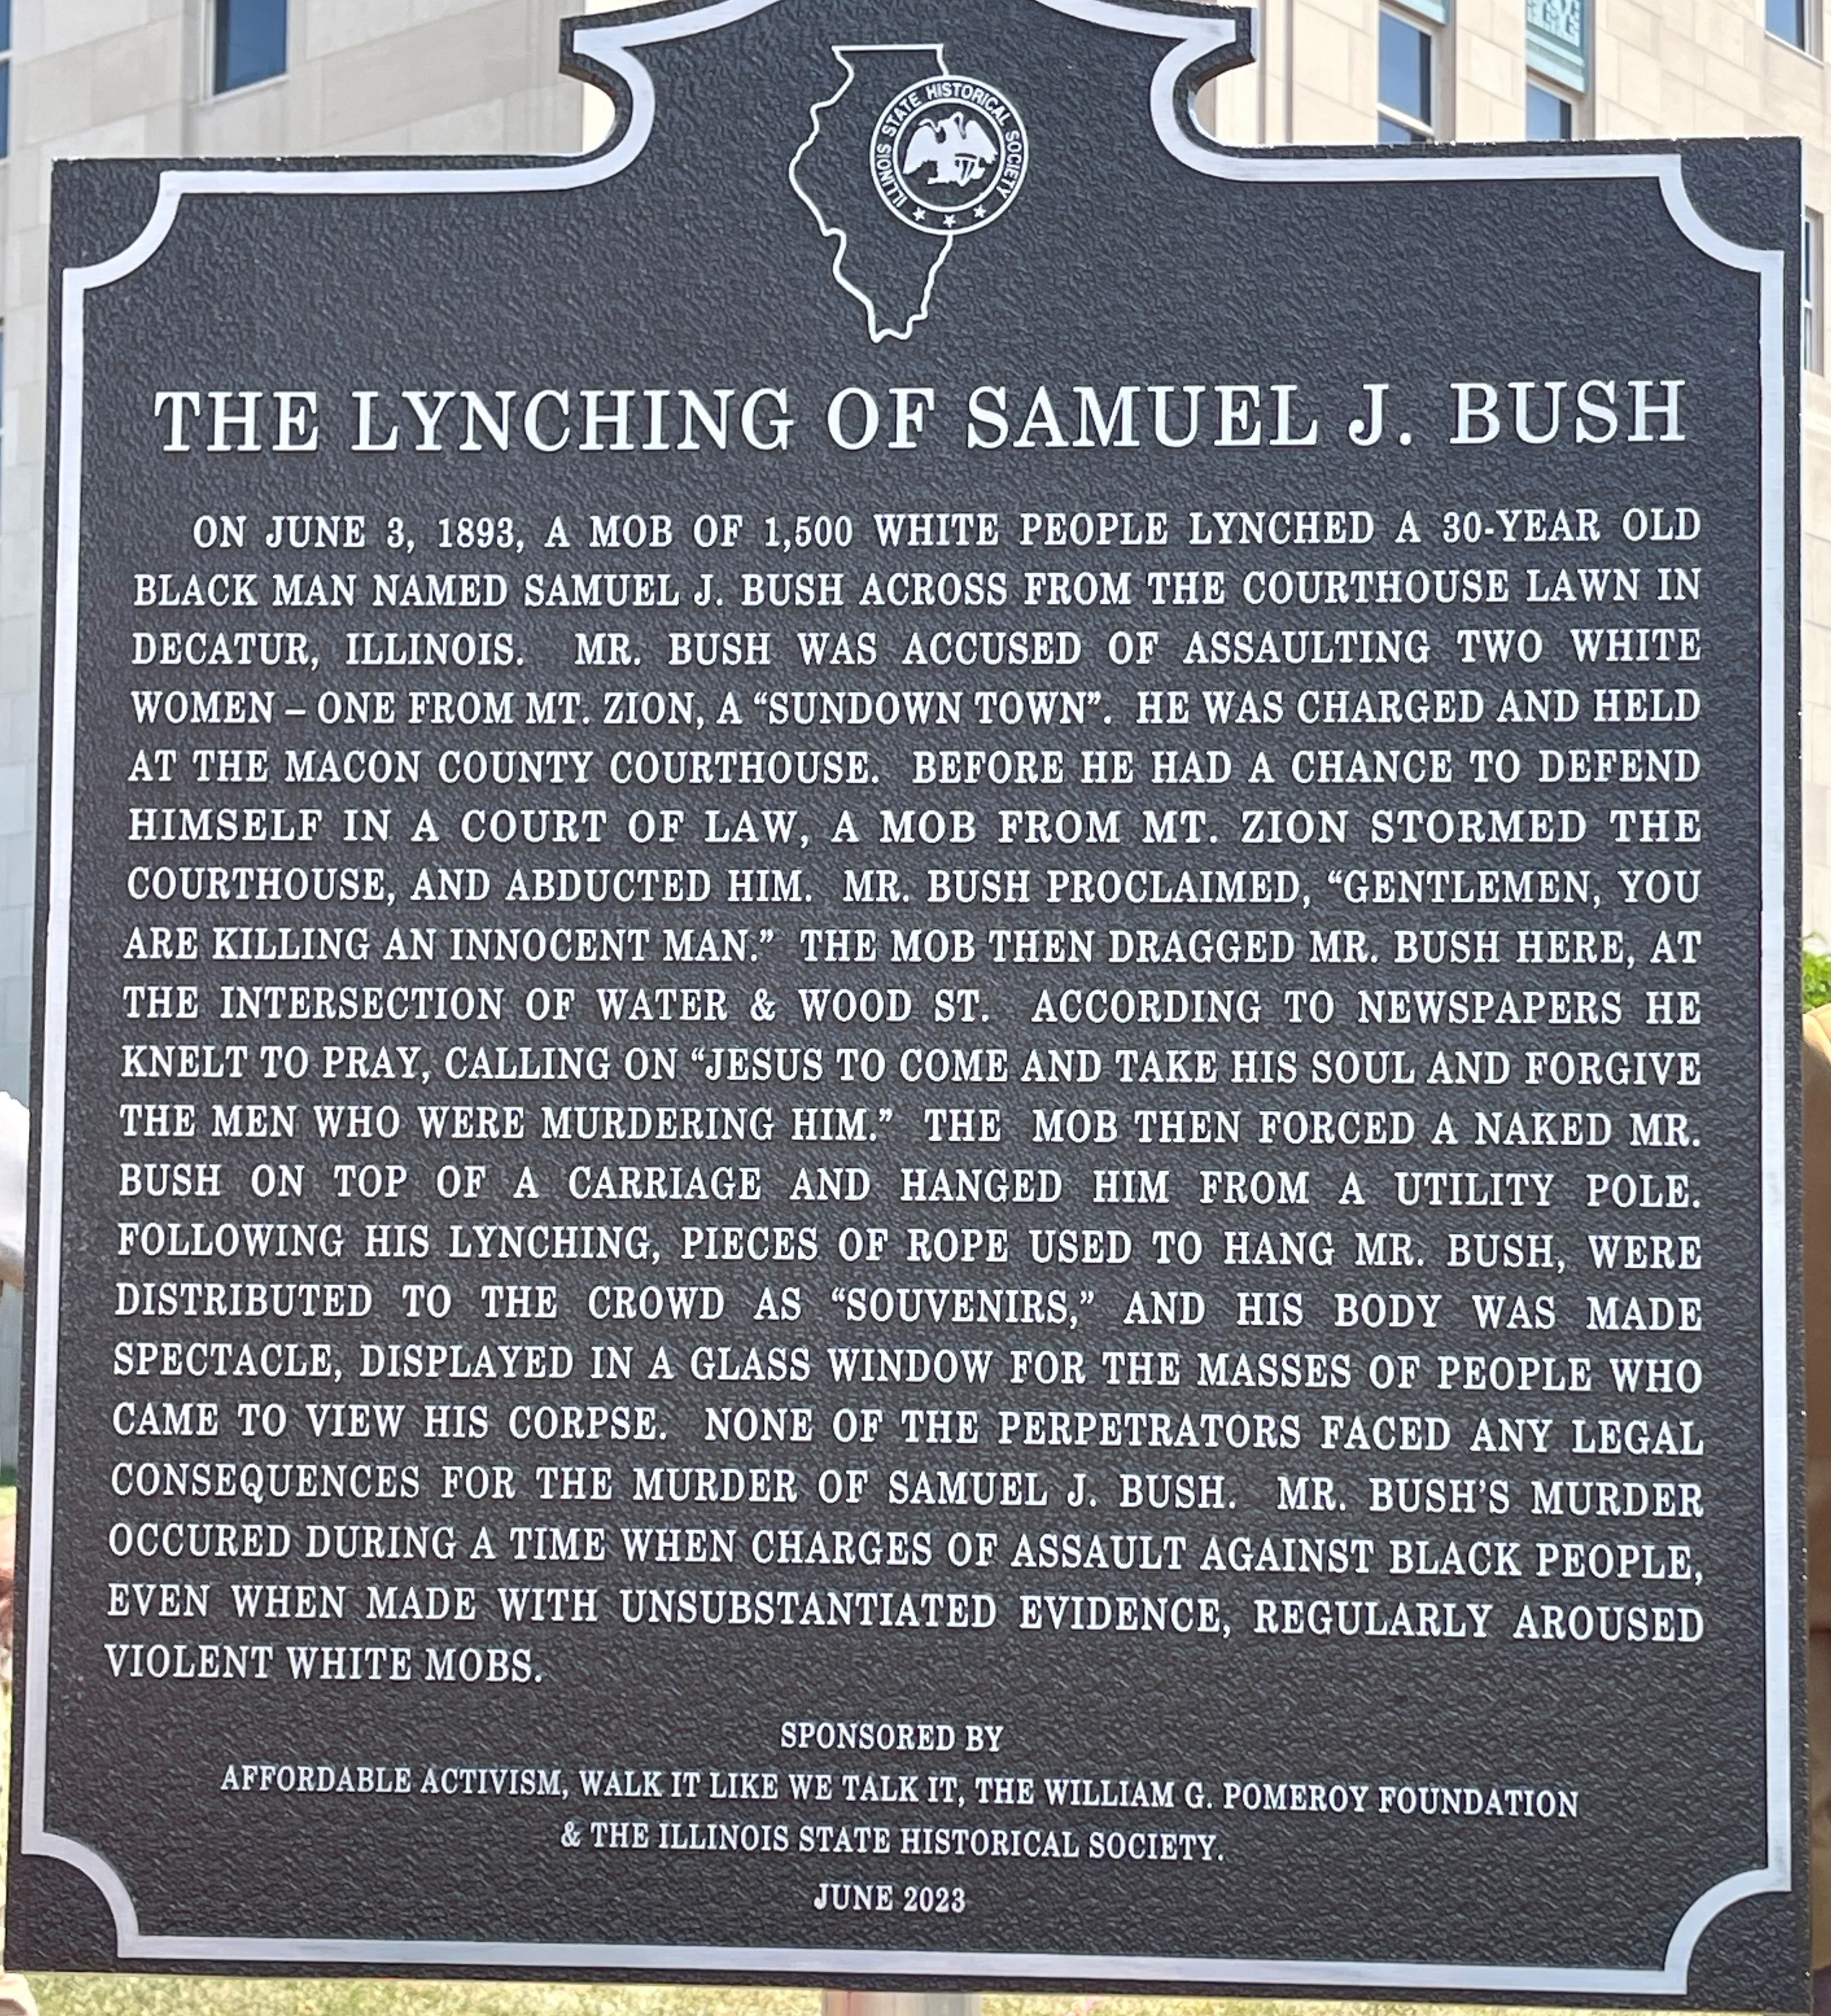 The Lynching of Samuel J. Bush Historical Marker at Macon Courthouse in Decatur, IL.